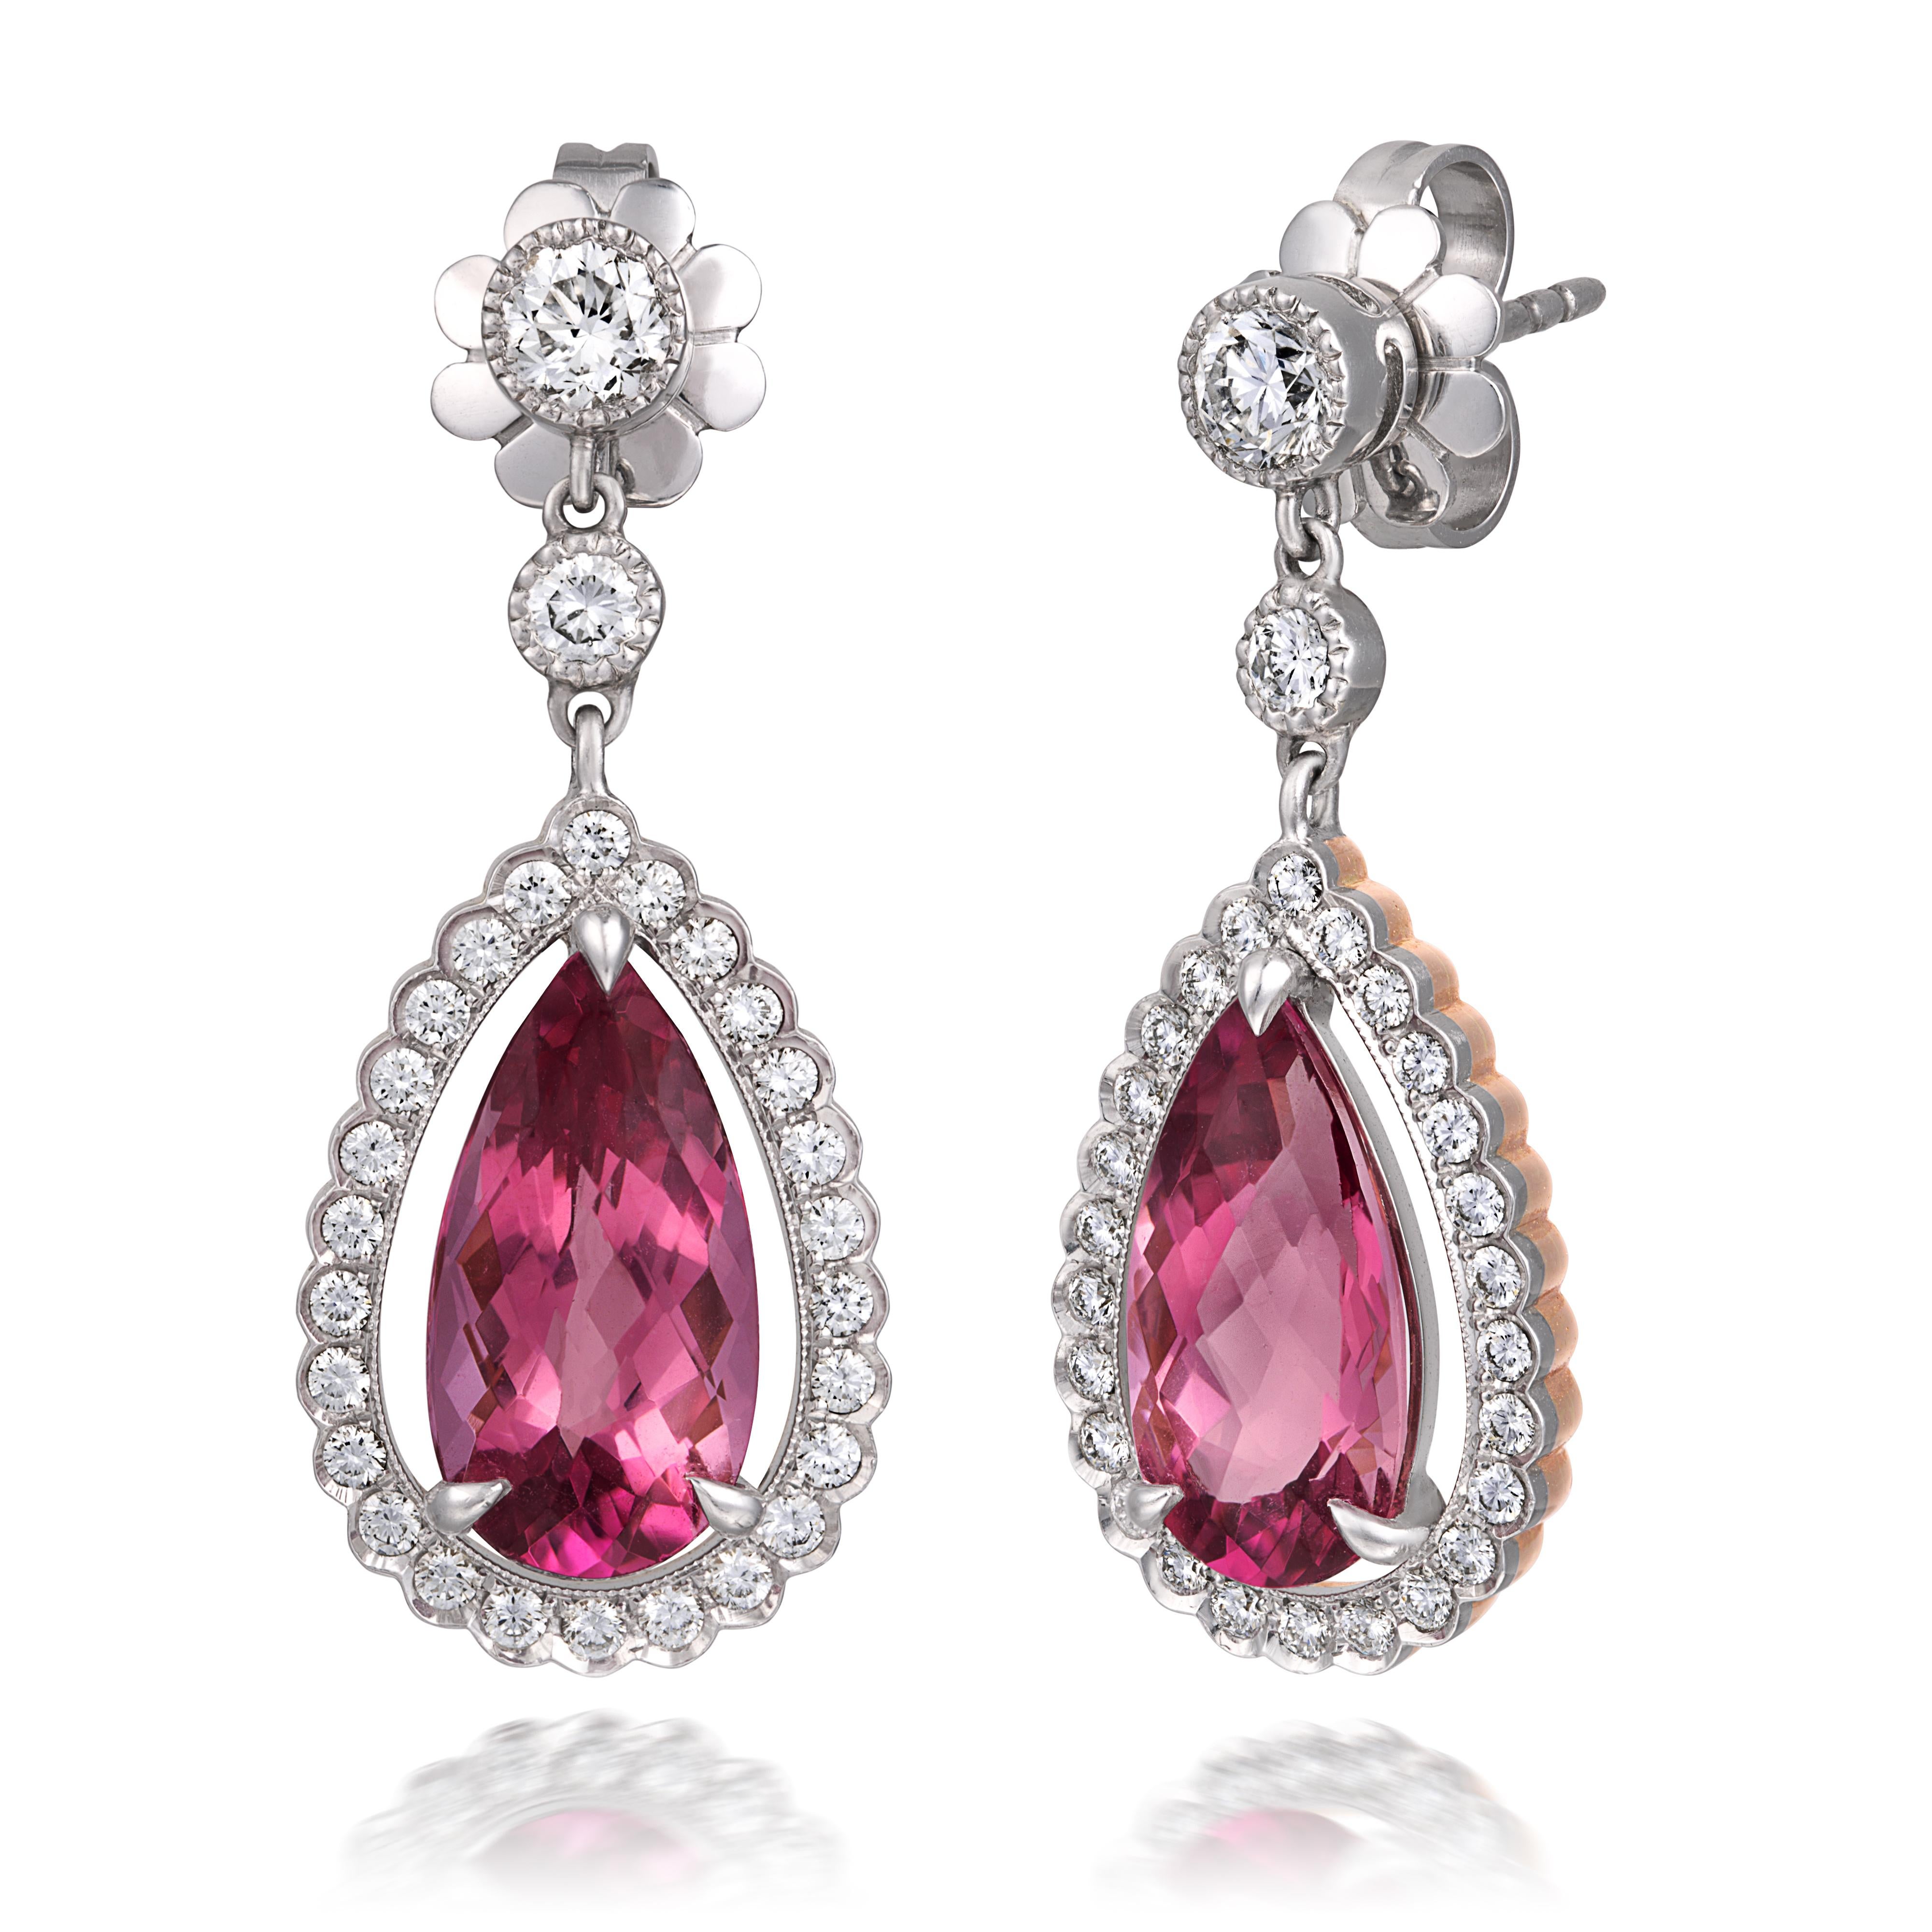 Experience the allure of these teardrop-shaped earrings, adorned with 6.42 carats of Pink Tourmaline and Diamonds. The Platinum and 18K Yellow Gold setting, embellished with Diamonds, harmoniously merges modern craftsmanship with timeless elegance.